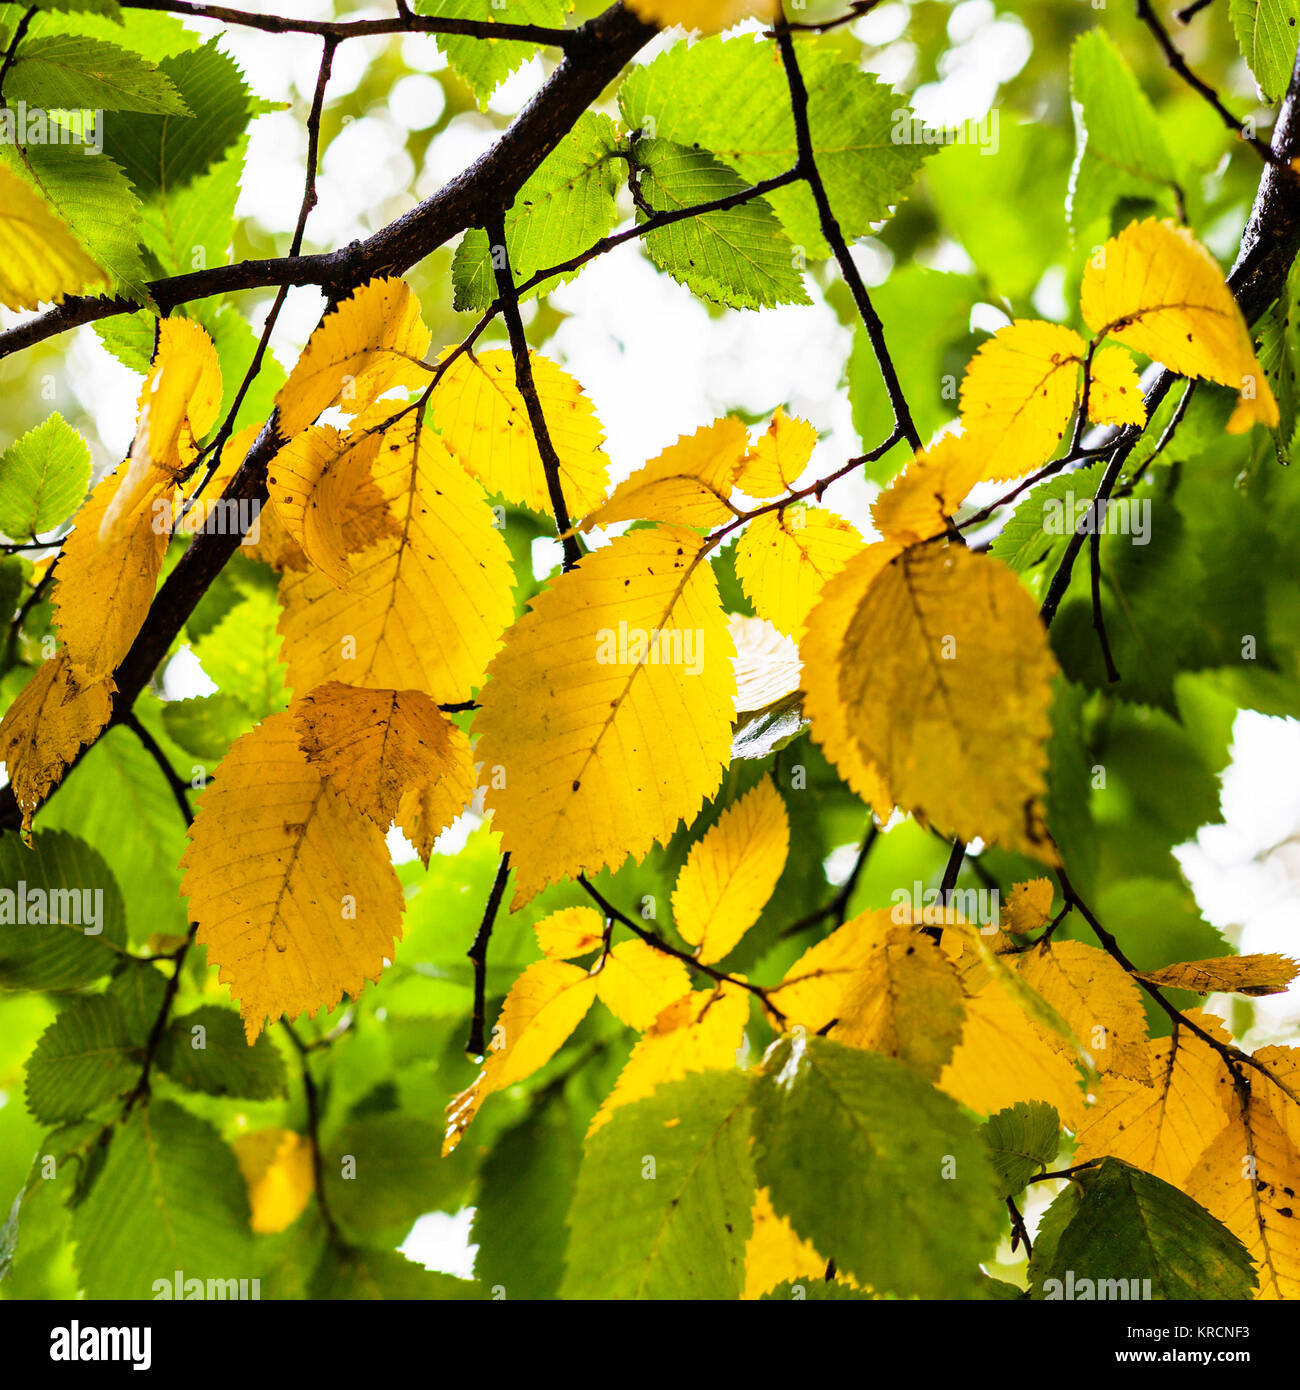 green and yellow leaves of Elm tree in autumn Stock Photo